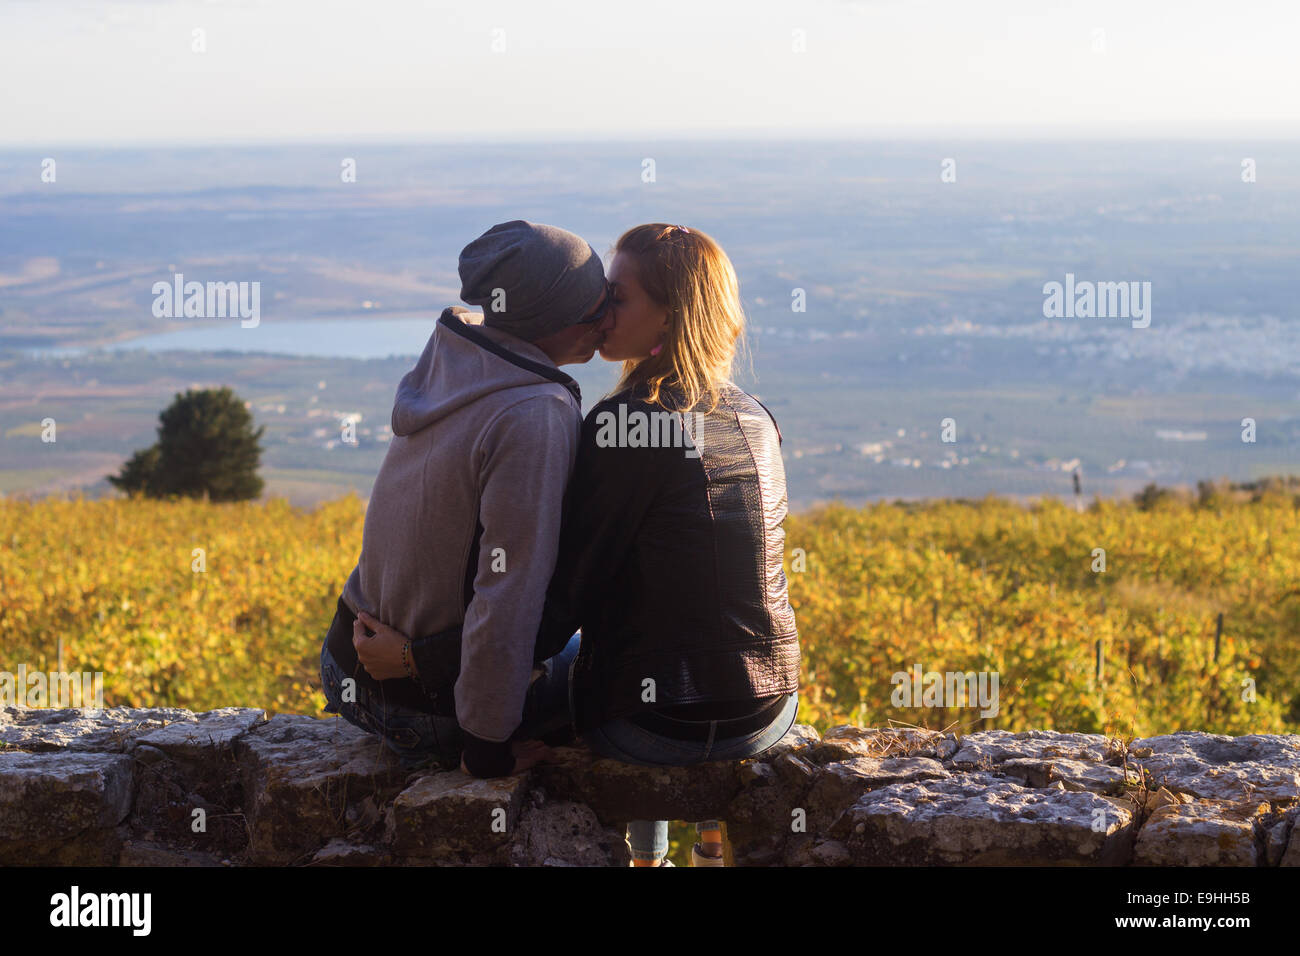 couple relationship young people lifestyle countryside sunset sitting 'copy space' Stock Photo